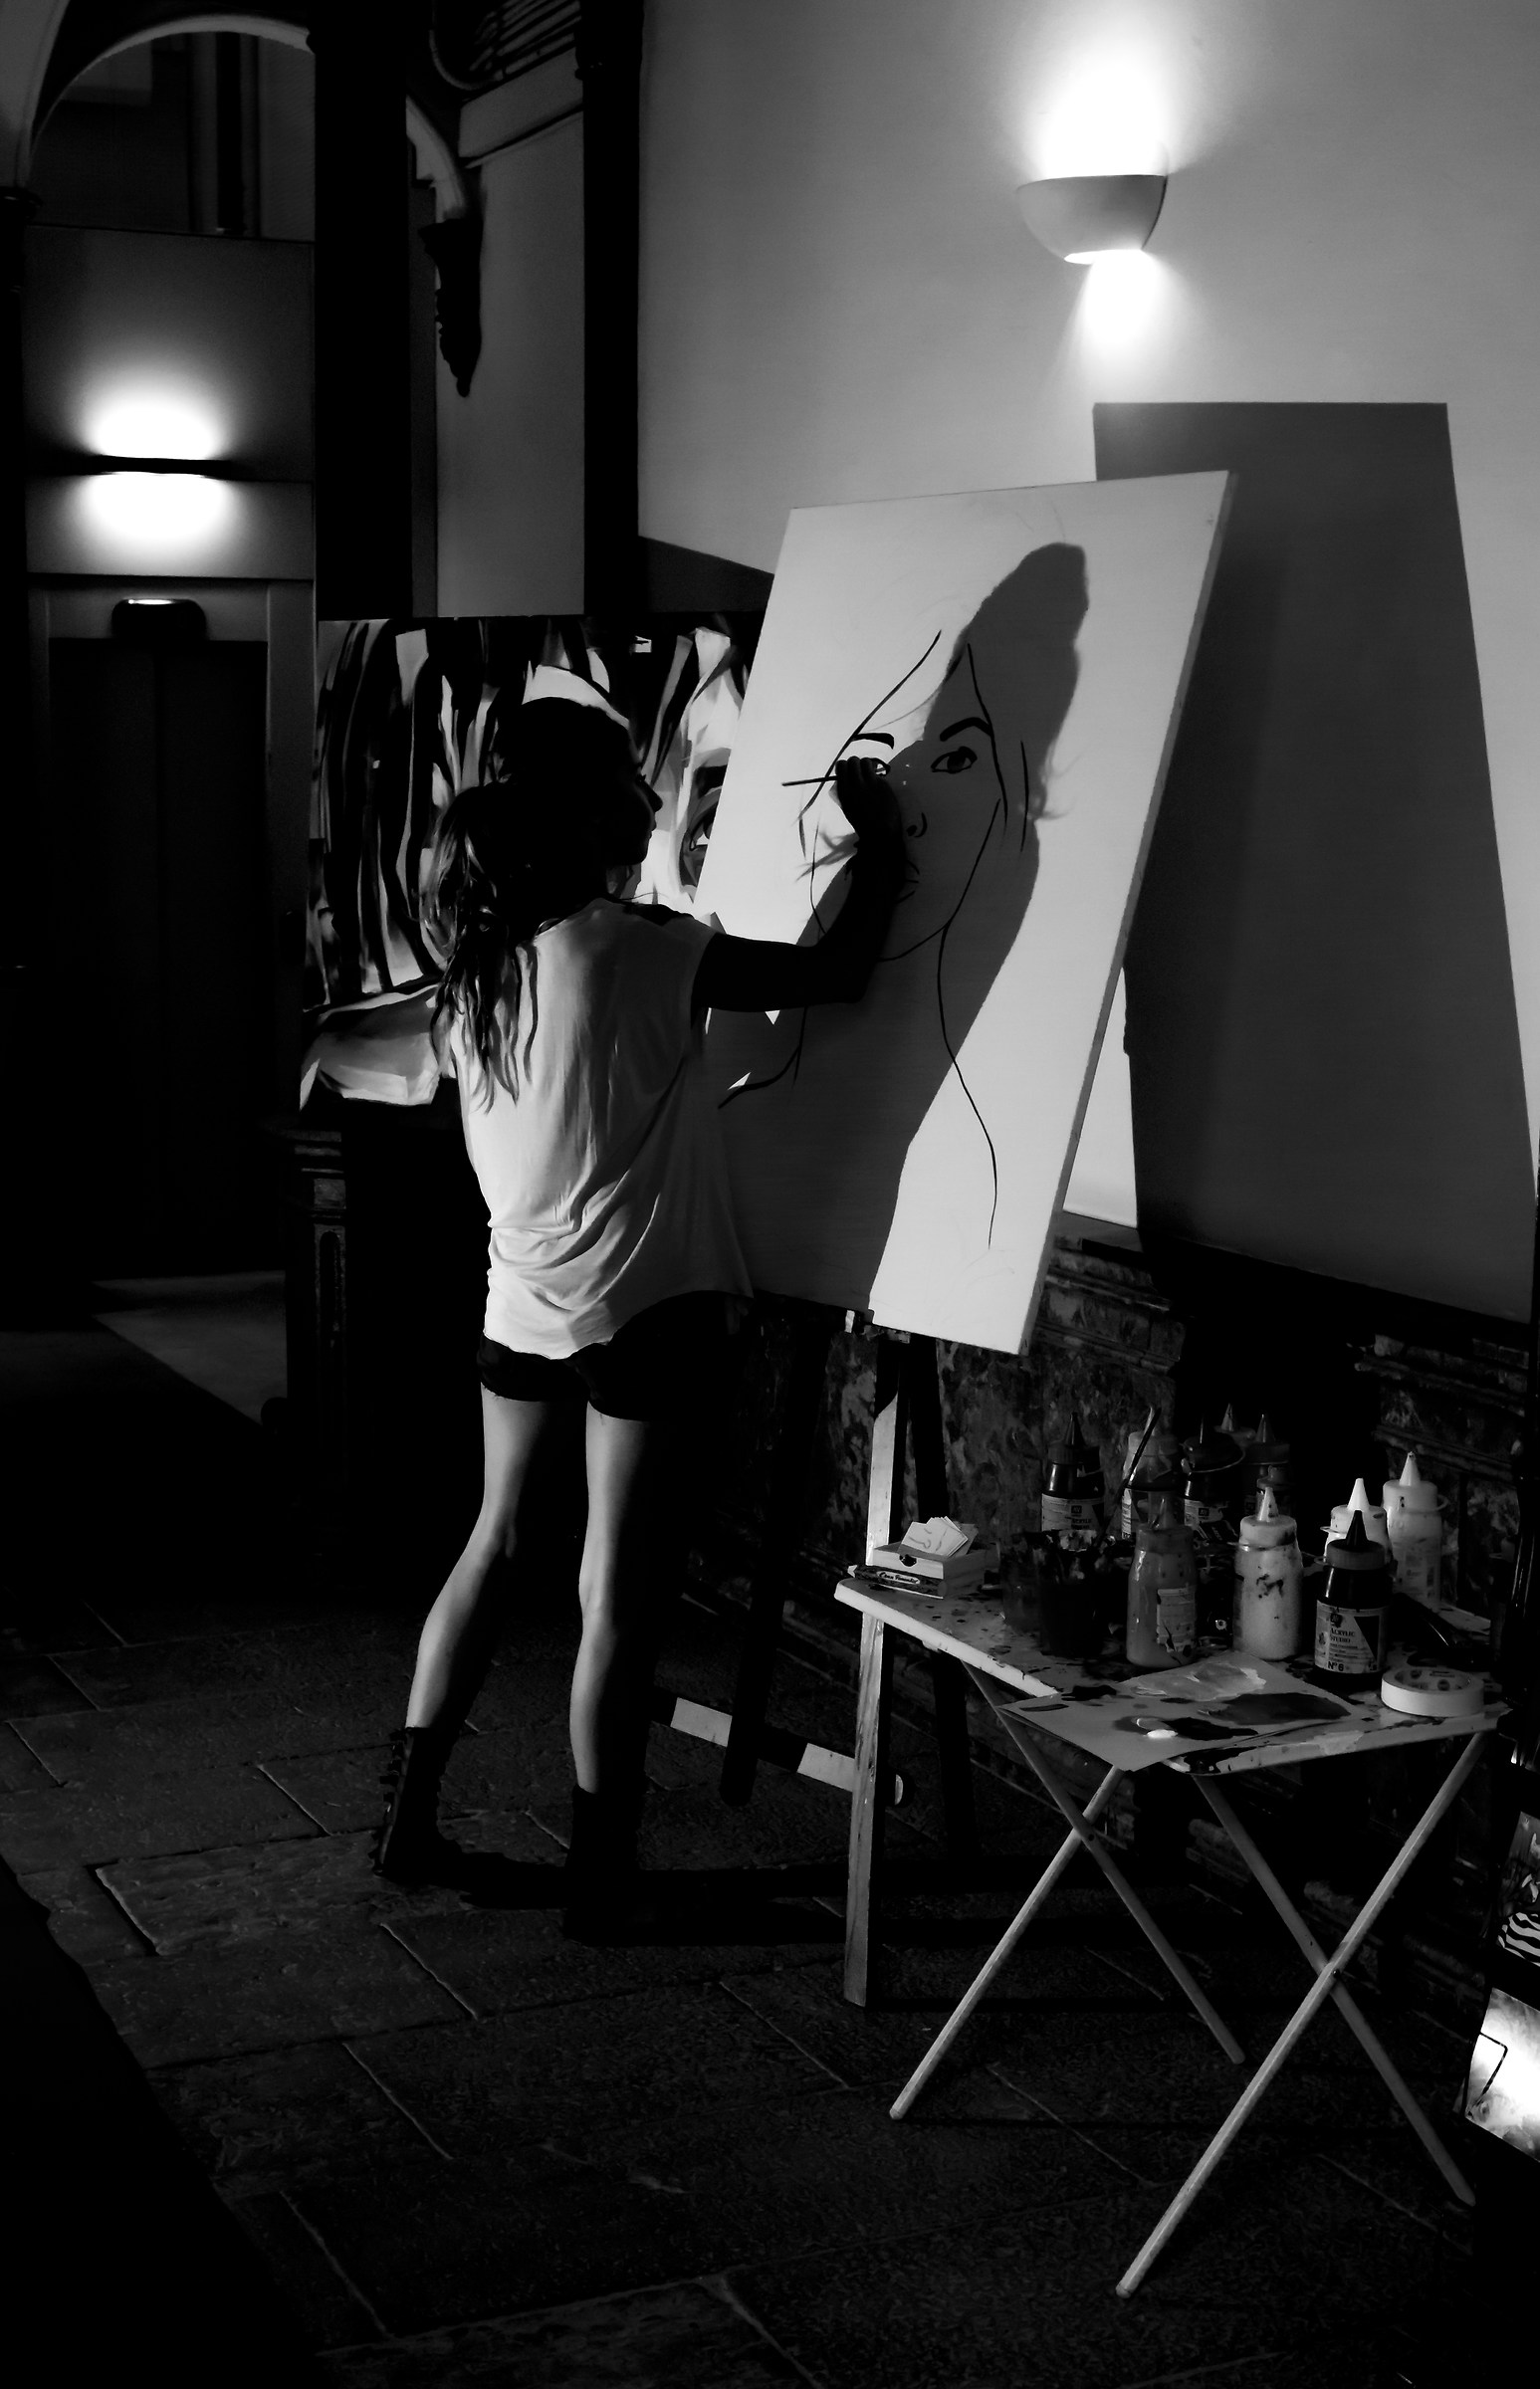 The painter....